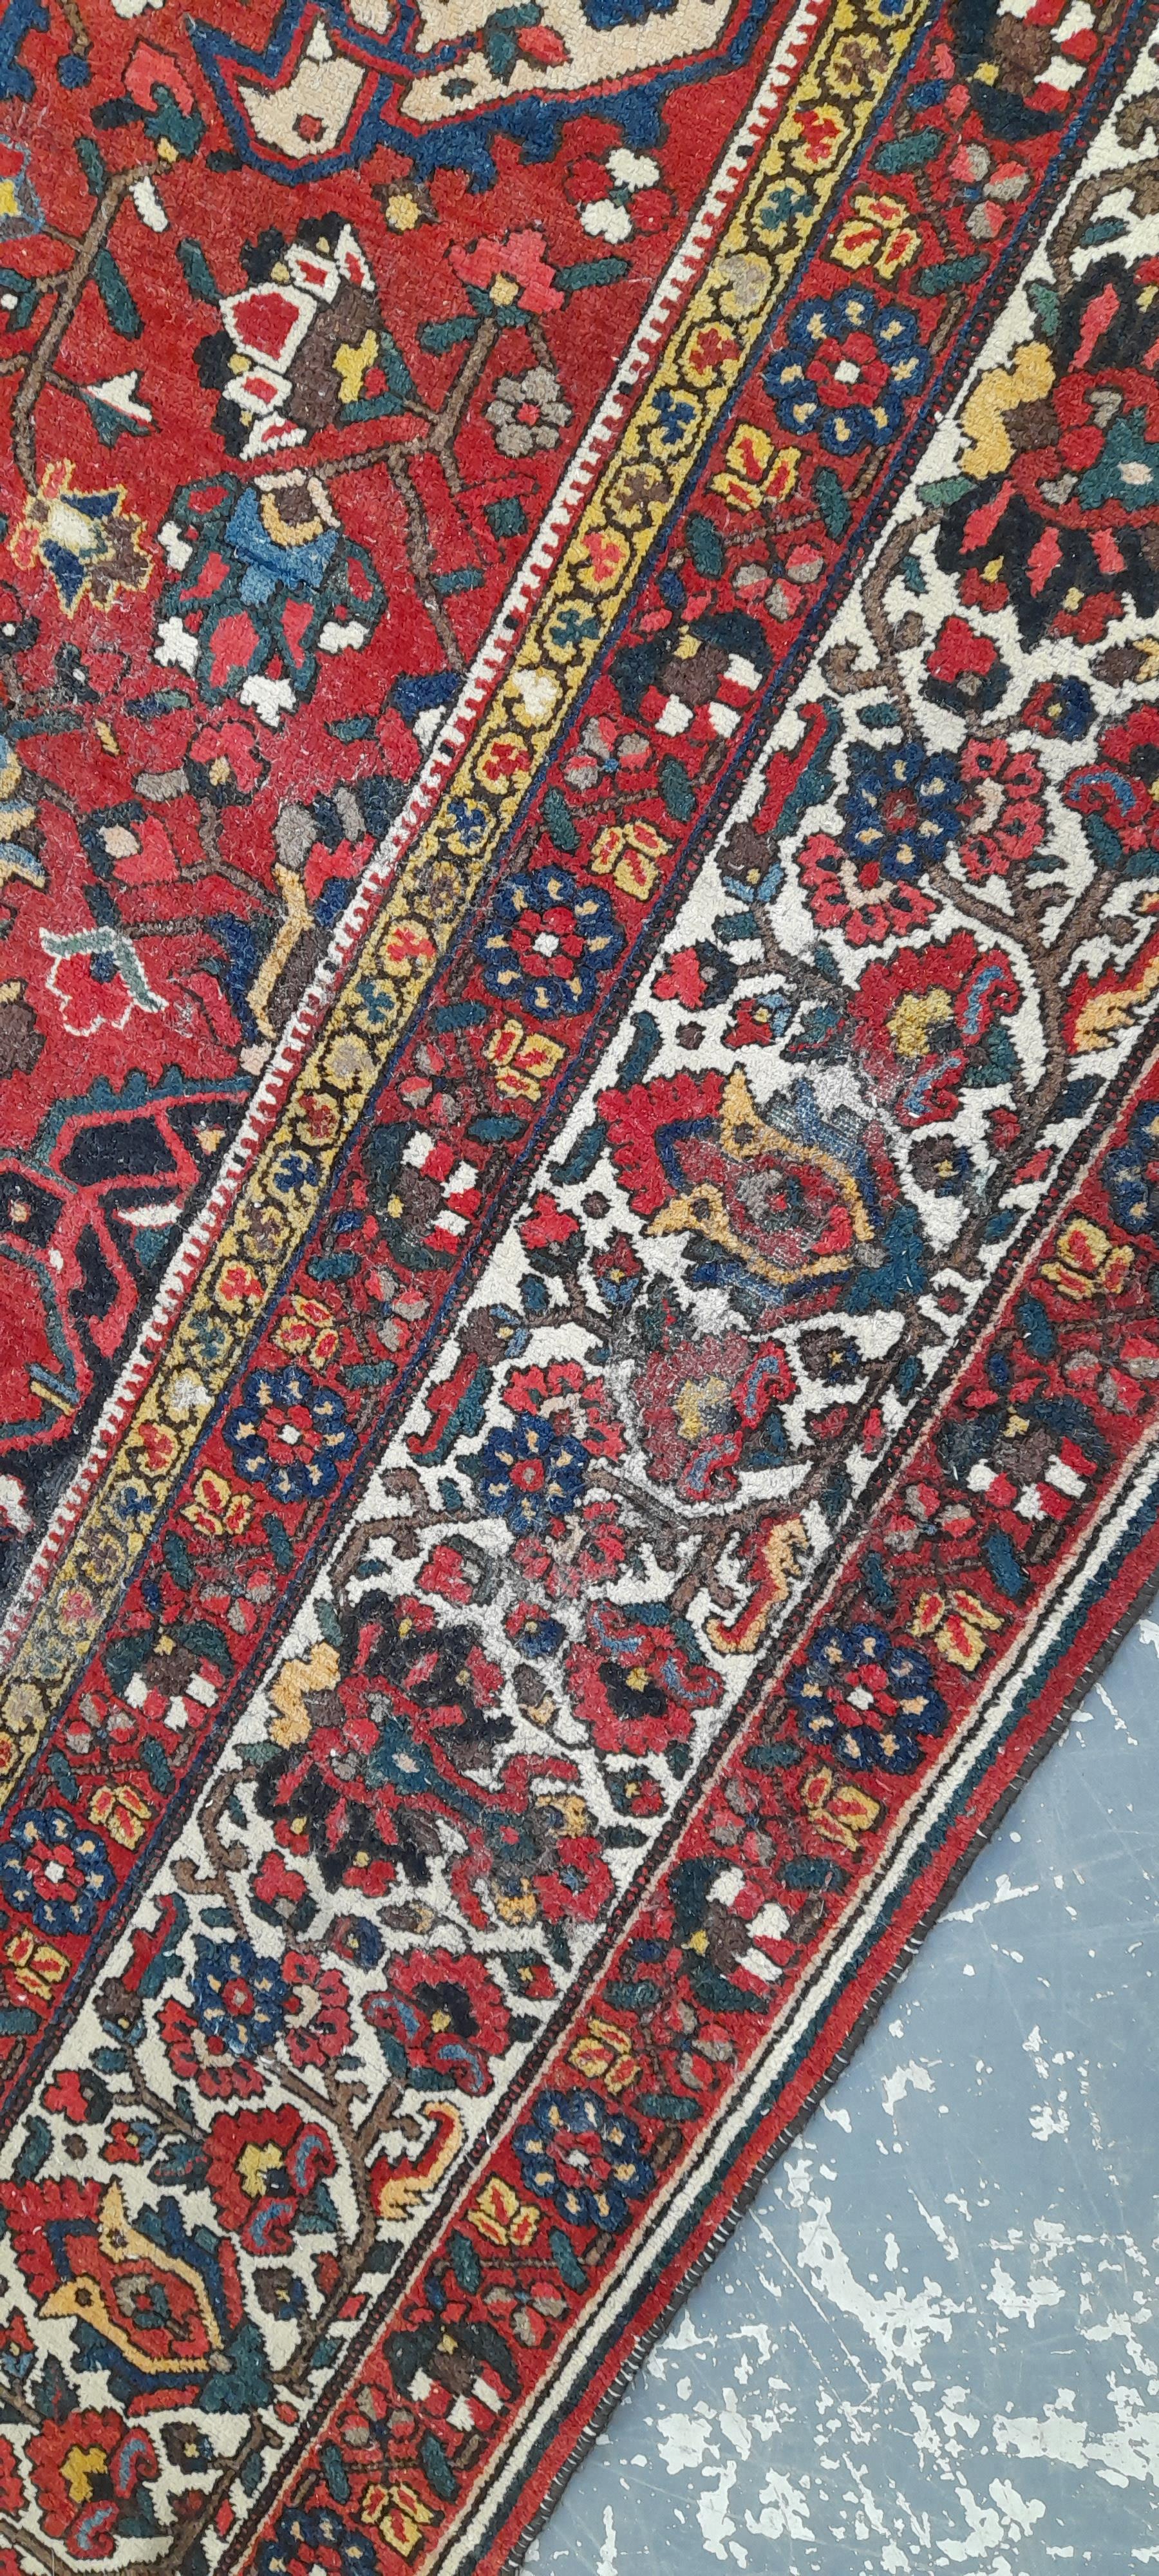 A COUNTRY HOUSE PERSIAN BAHKTIARI CARPET. 560 x 396cms - Image 3 of 8